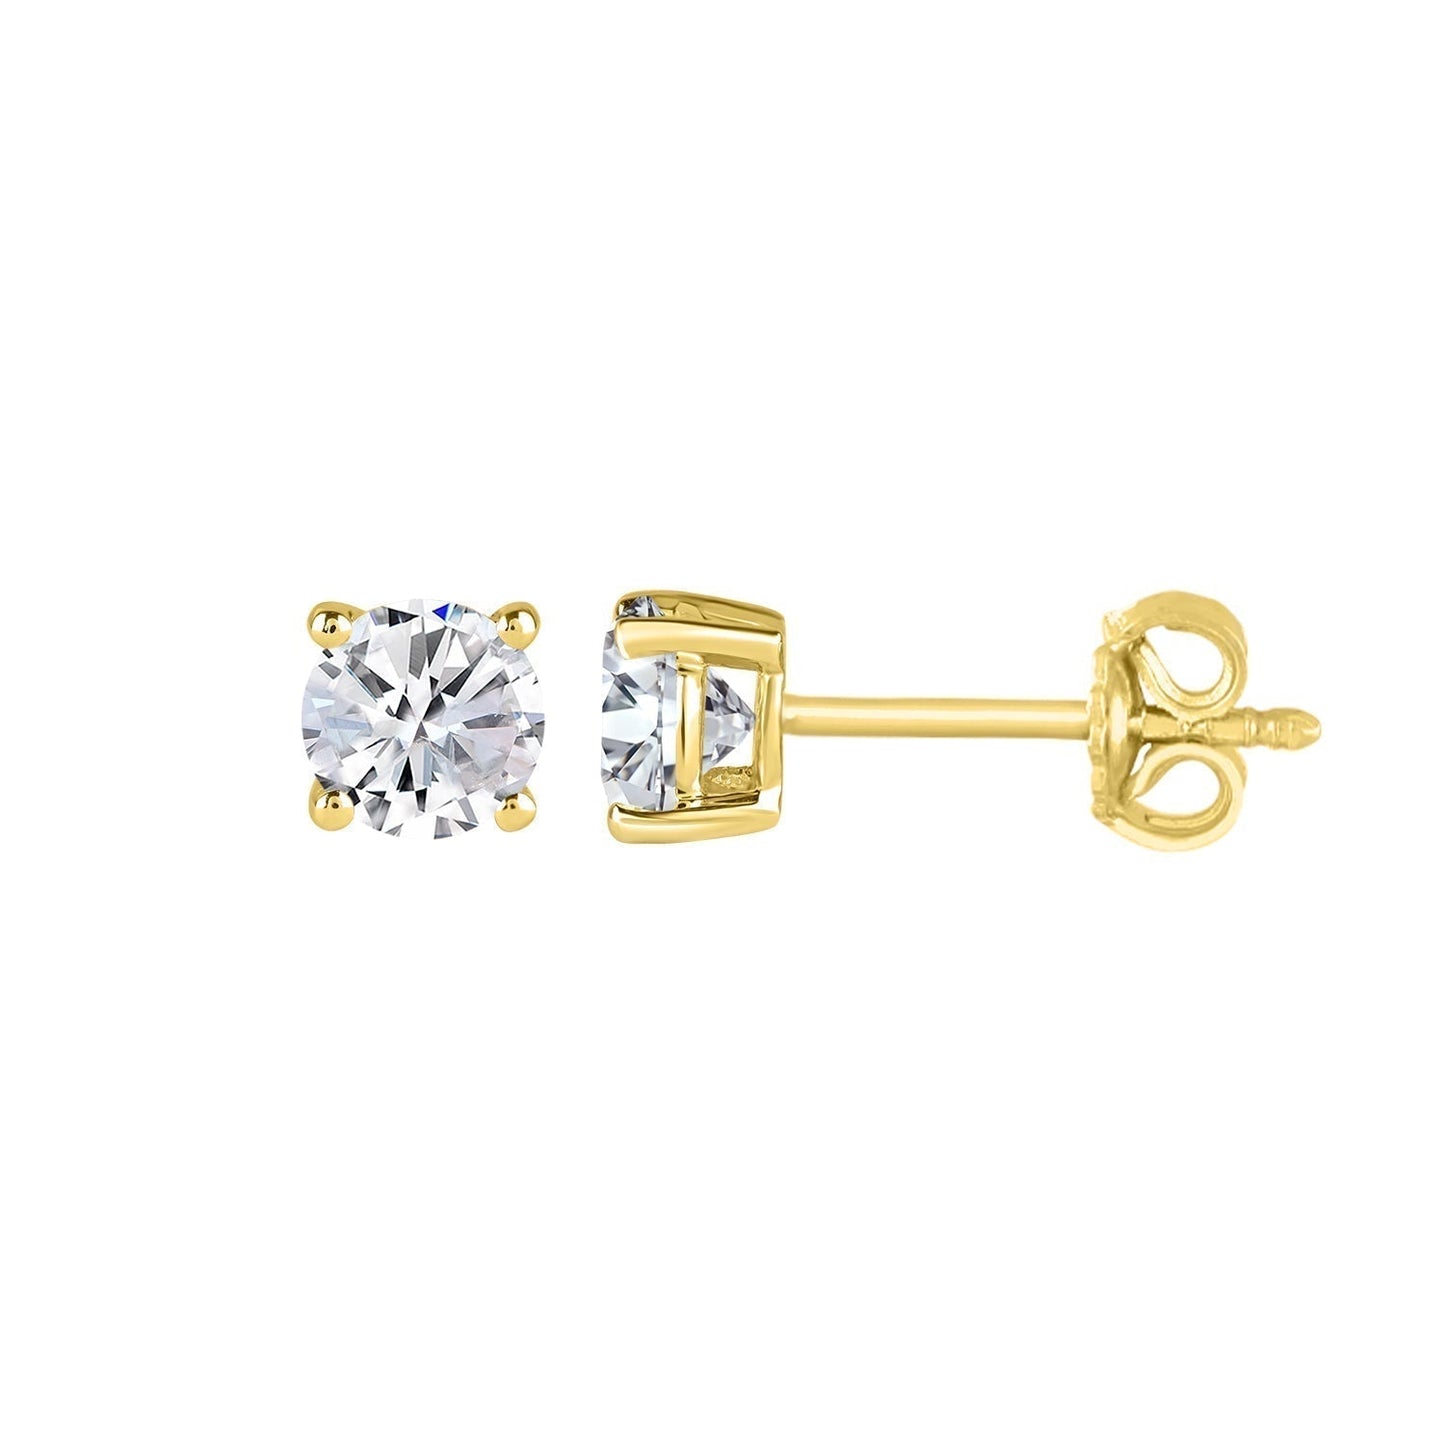 0.90 Carat Solitaire Stud Earrings with Friction Back in 14K Gold